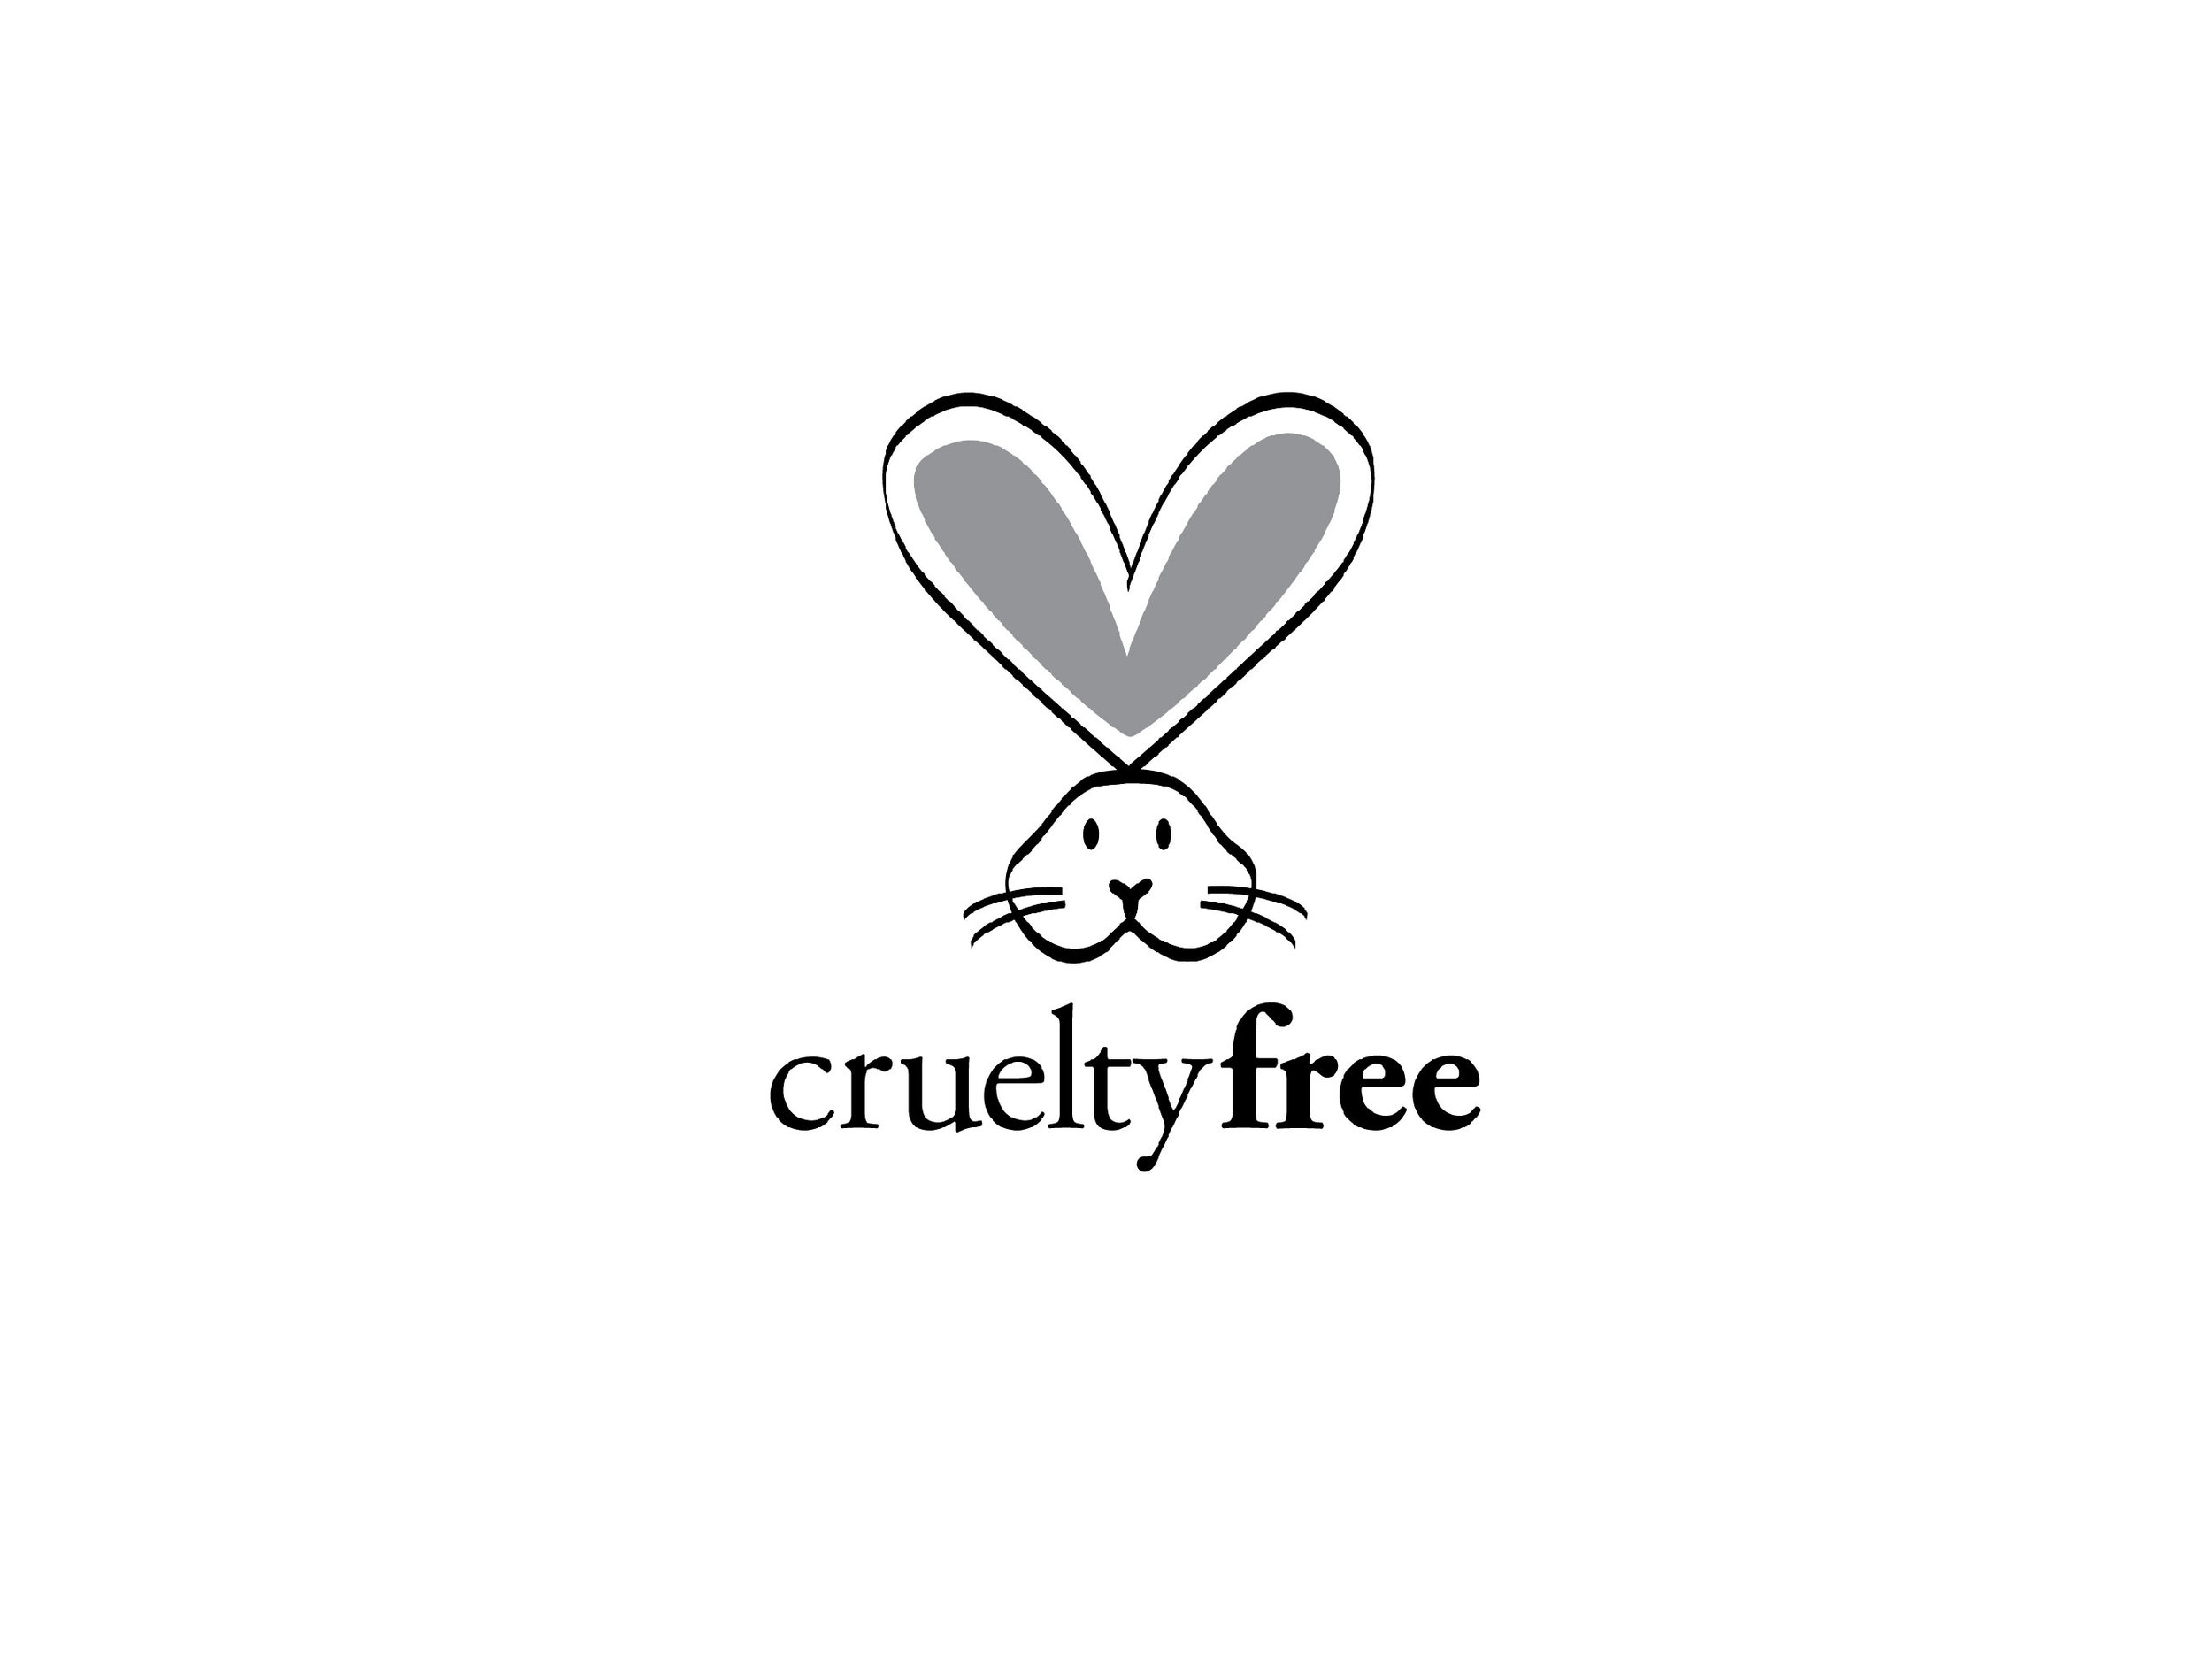 DPR SKN - Leaping Bunny Certified Cruelty-Free